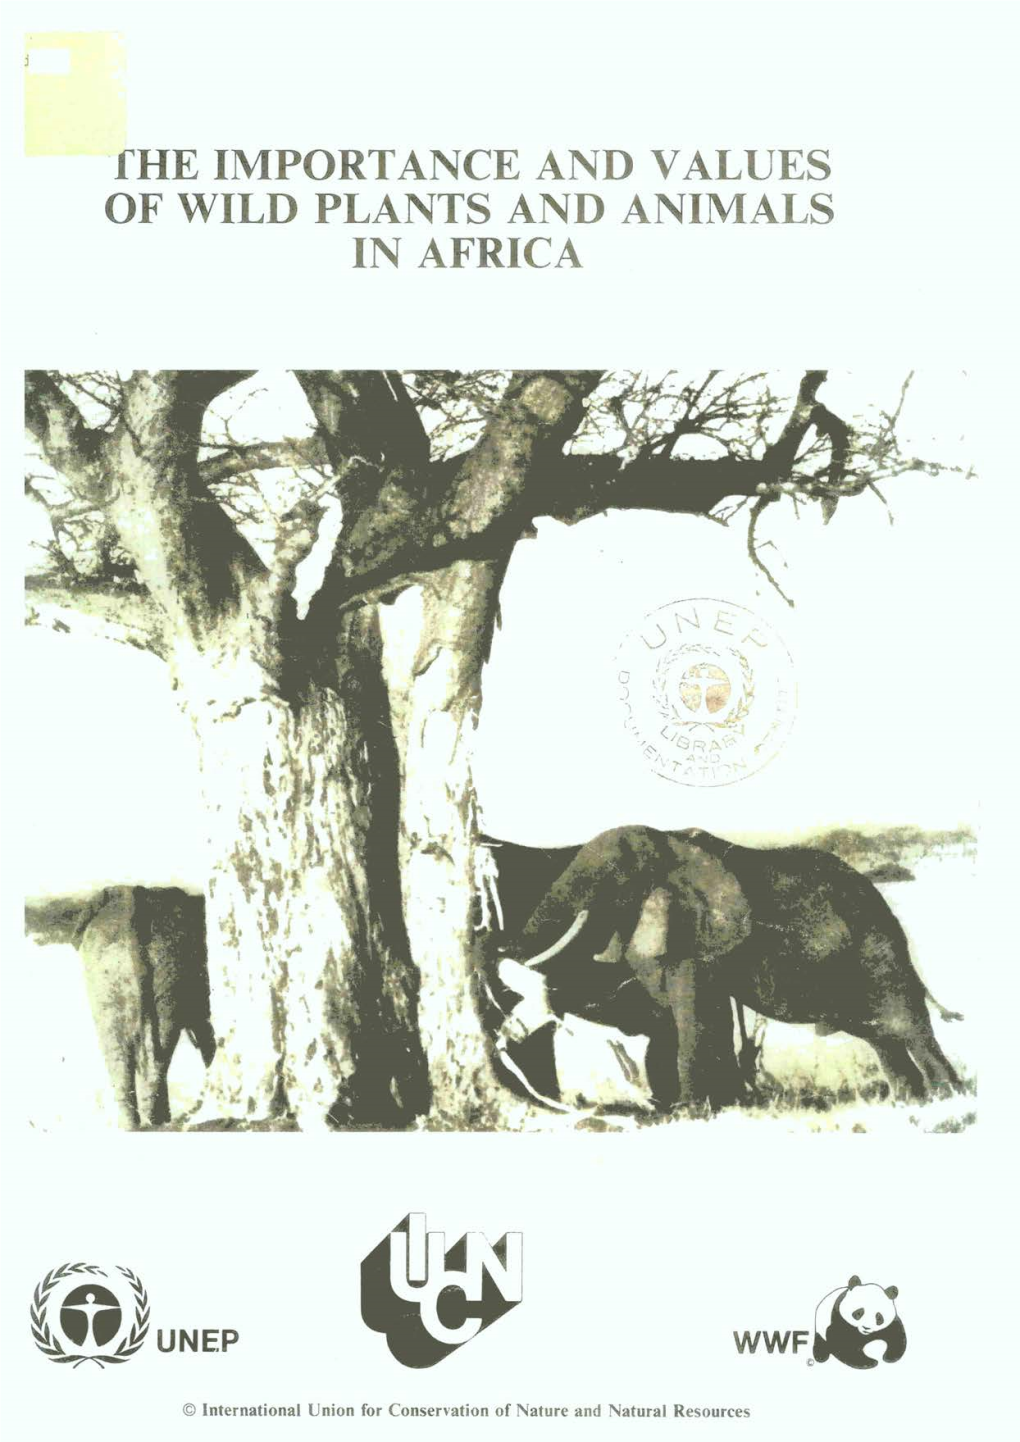 Fhe IMPORTANCE and VALUES of WILD PLANTS and ANIMALS in AFRICA